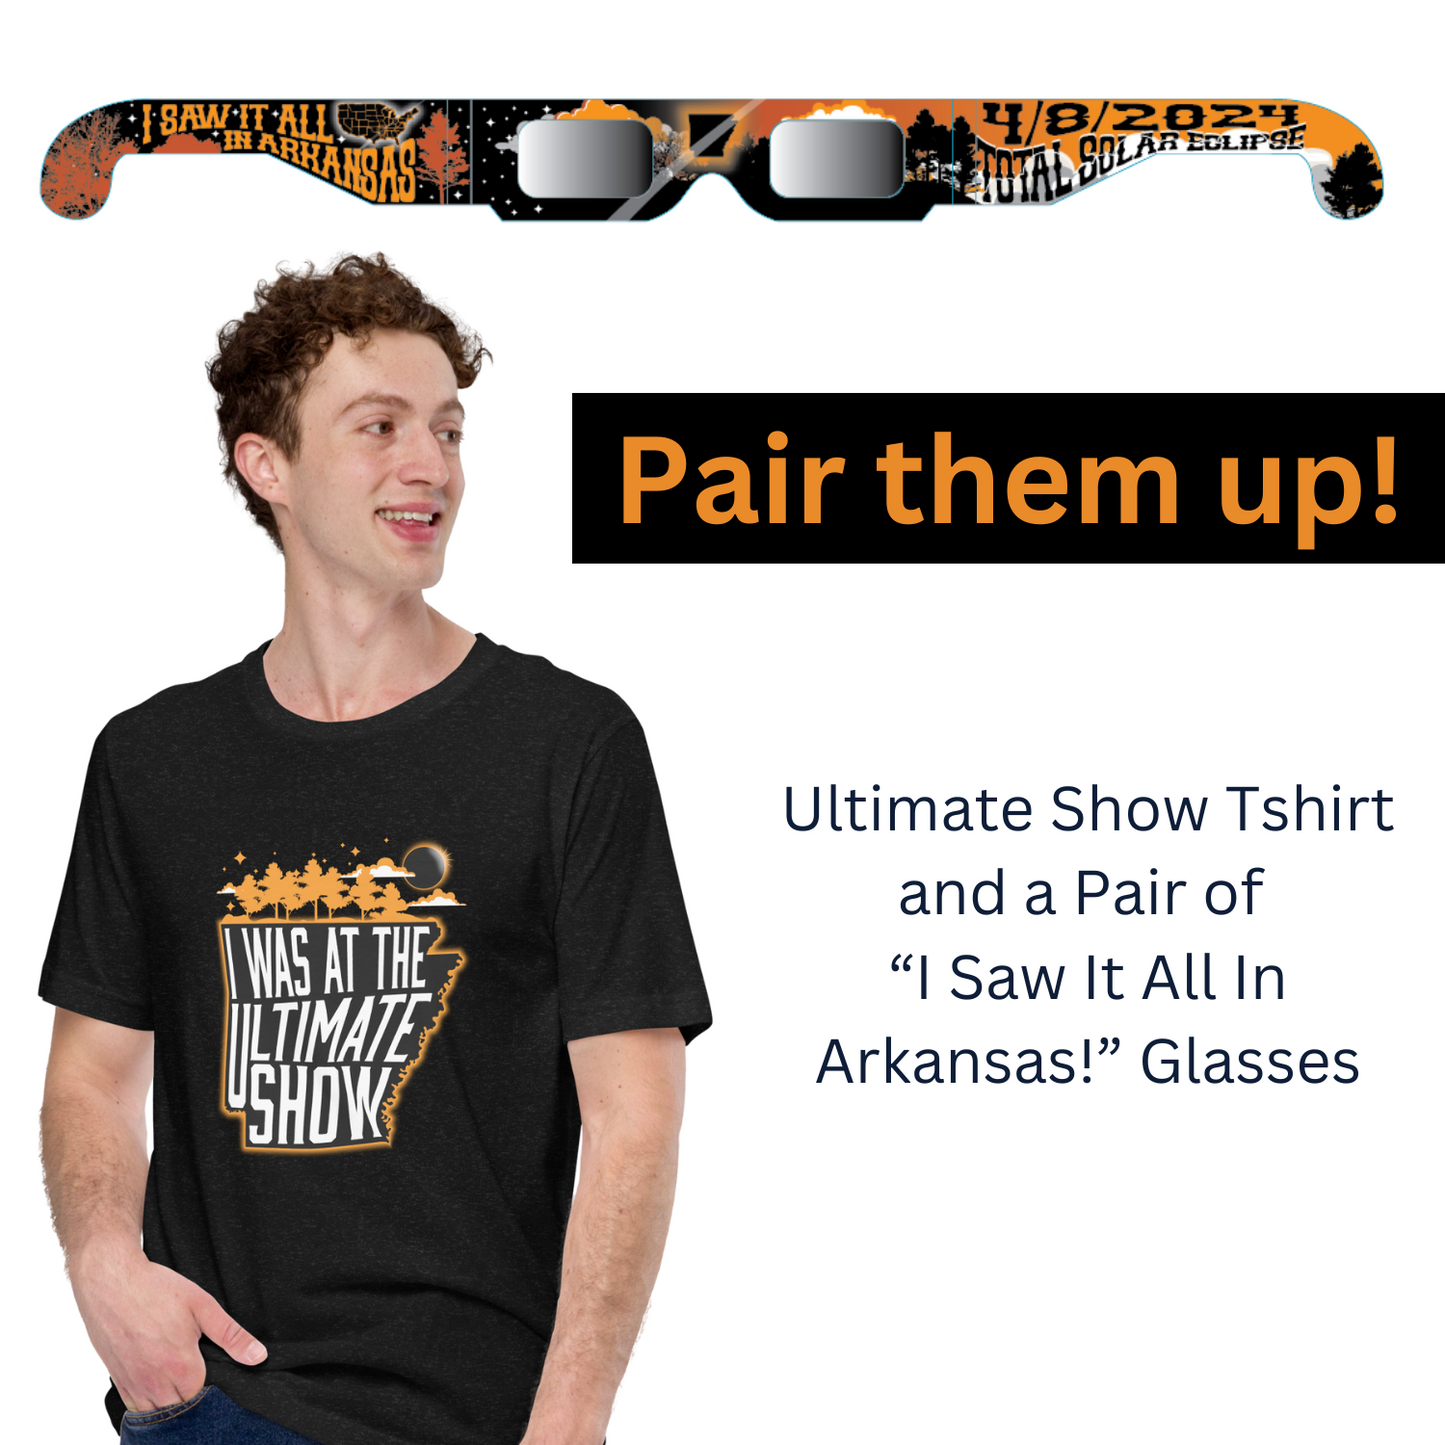 The Arkansas "Ultimate Show" Pair - Tshirt and Eclipse glasses, April 2024 Total Eclipse